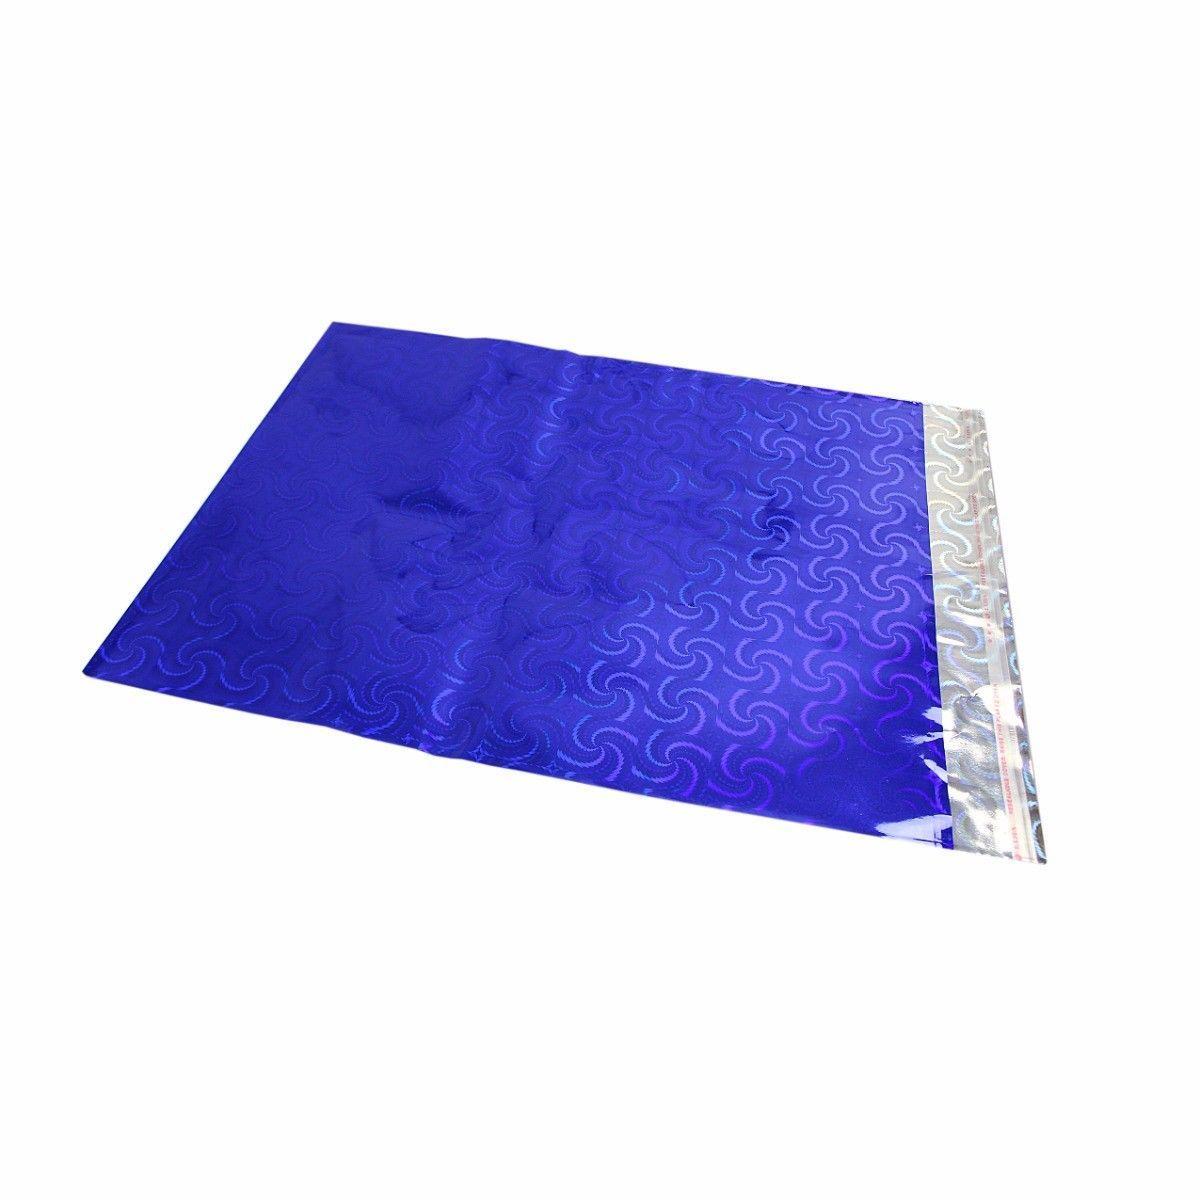 Shiny Gift Wrapping Packaging Gift Bag Envelope 28cm x 36cm Pack Of 3 Assorted Colours 4914 (Large Letter Rate)